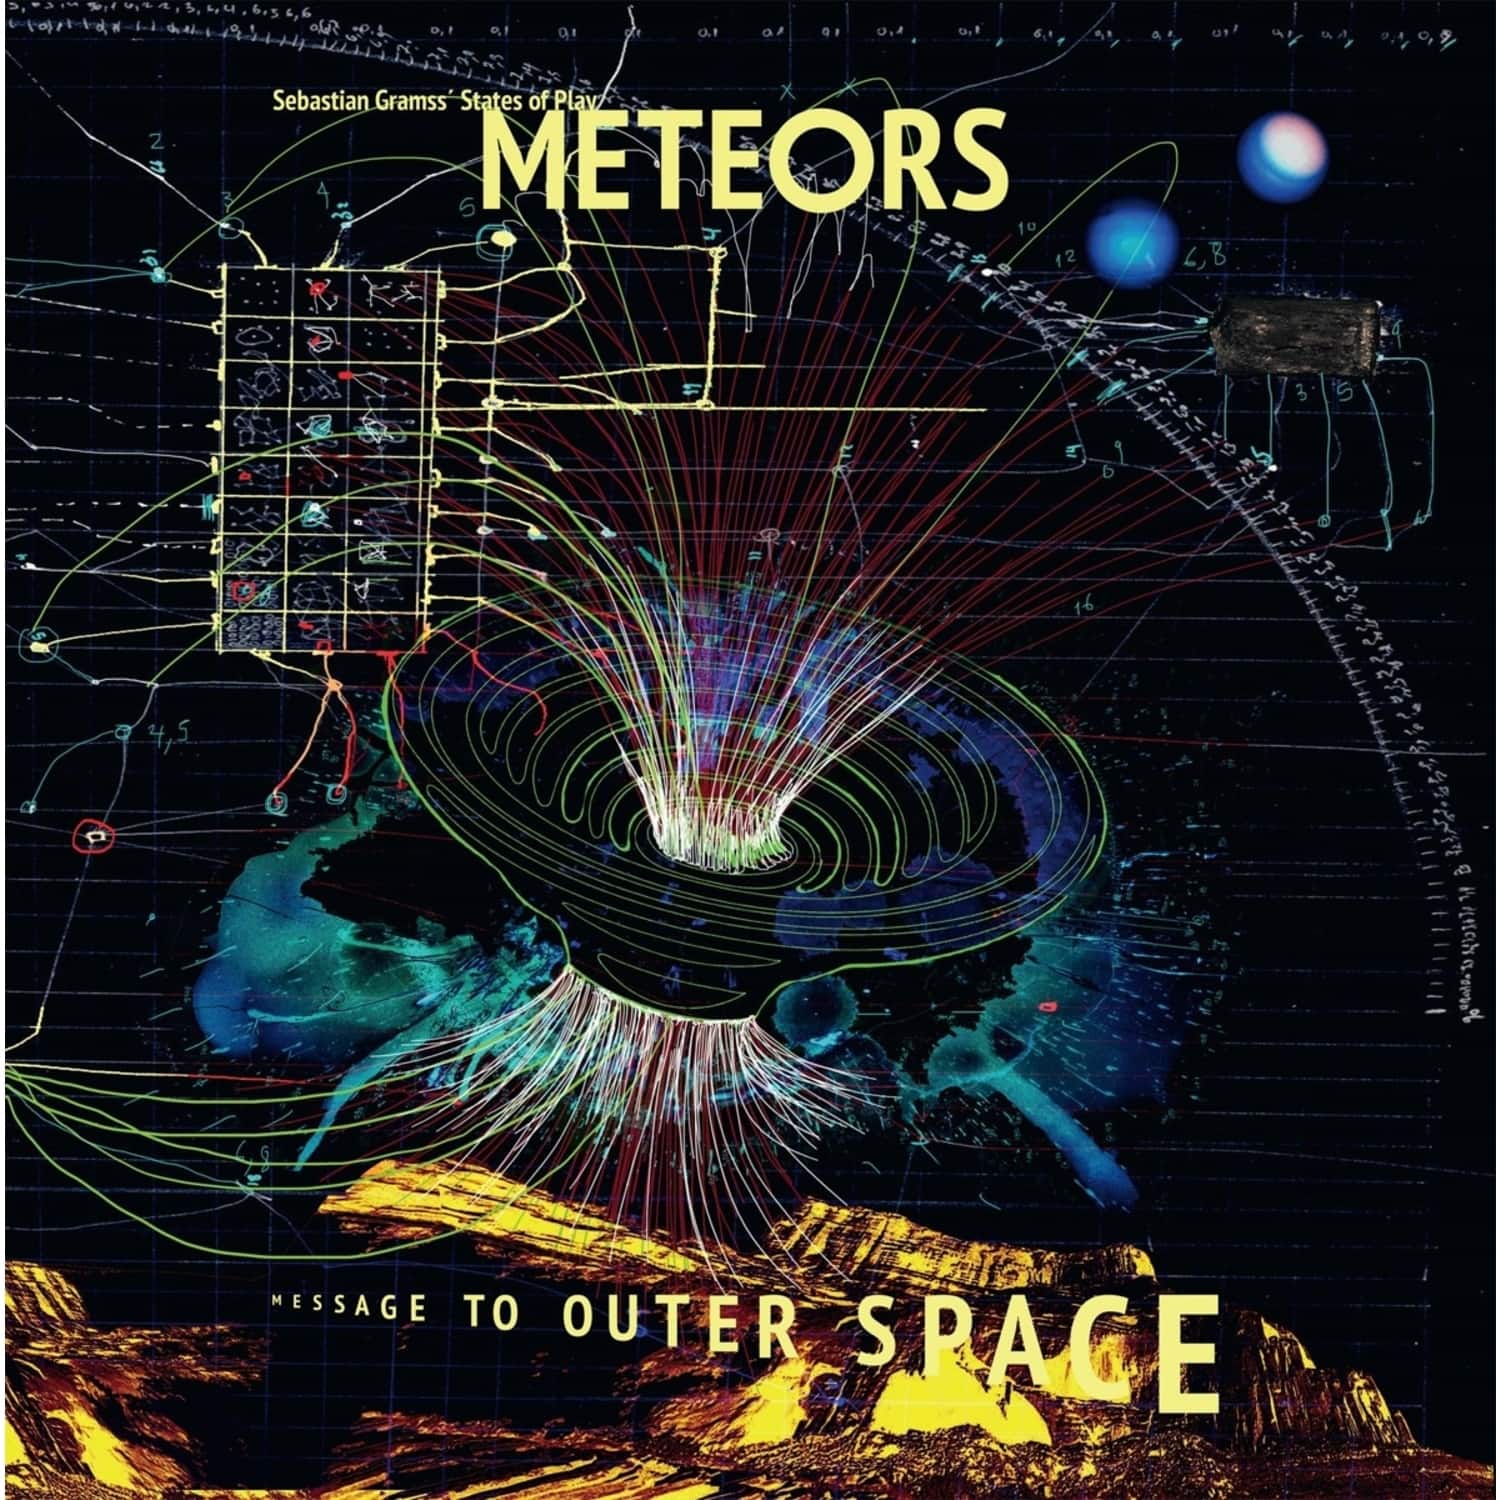 Sebastian Gramss States Of Play - METEORS-MESSAGE TO OUTER SPACE 